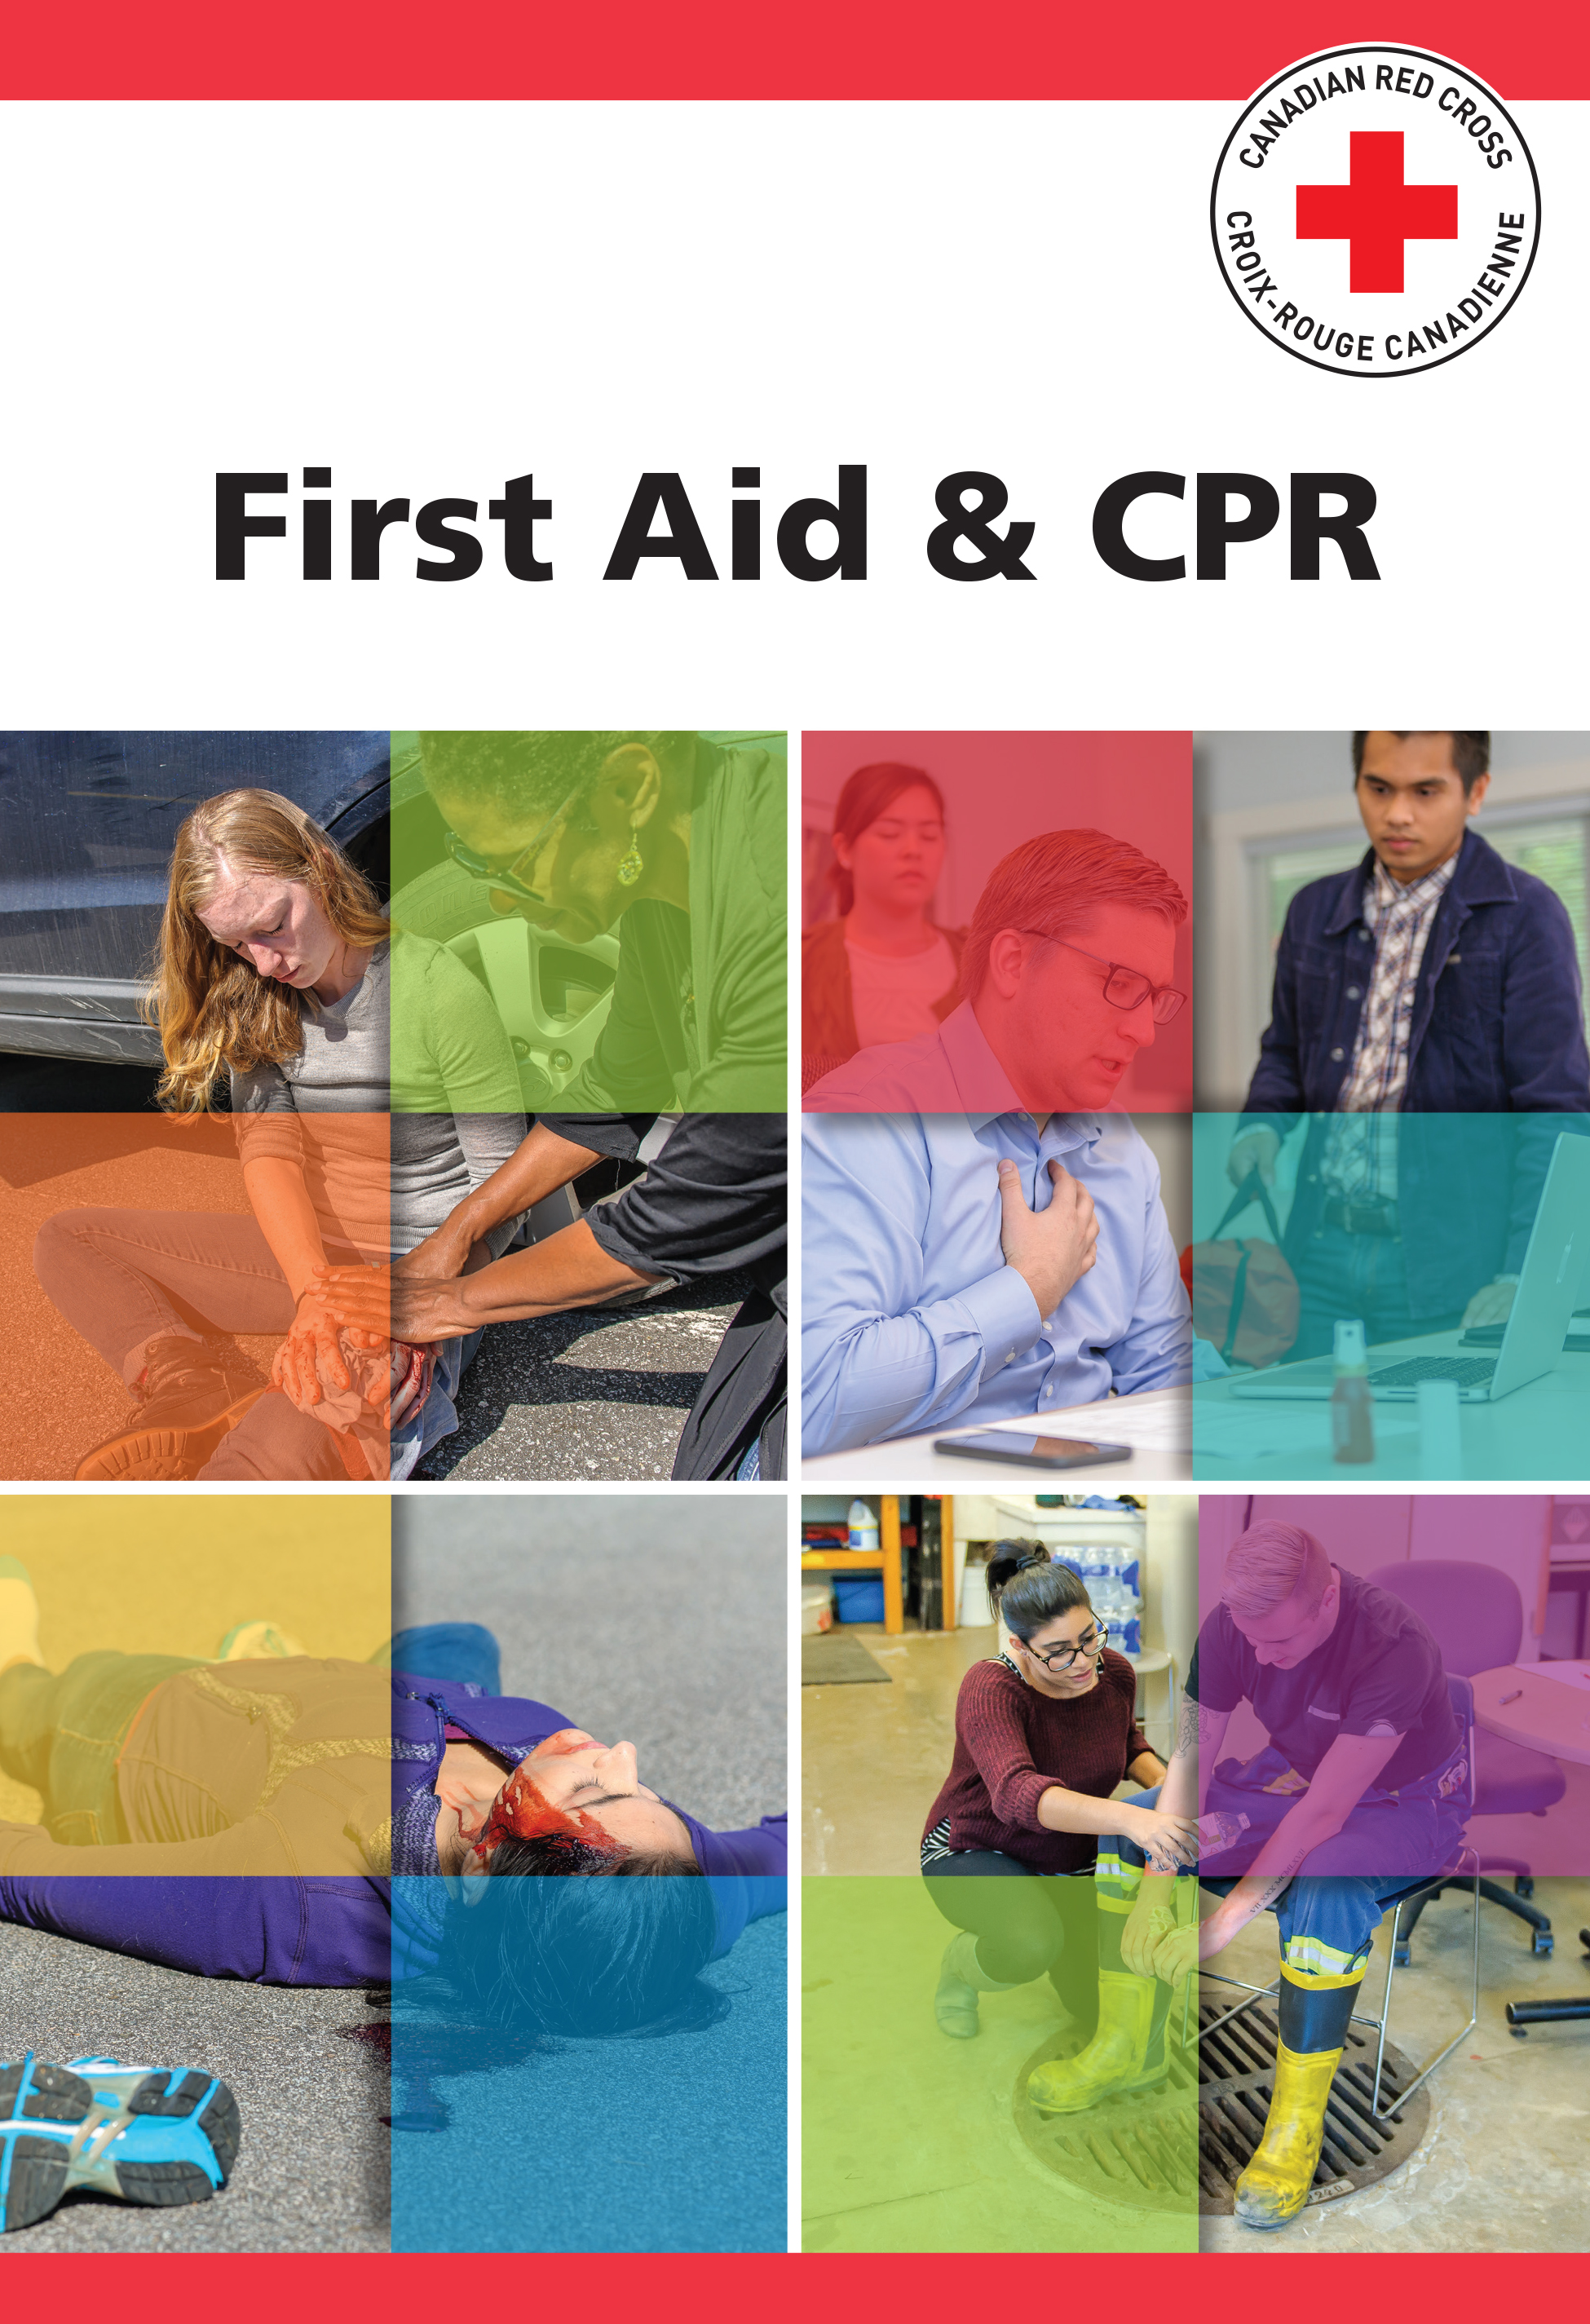 First Aid Course Materials for Marine Basic First Aid Course - CPR (Blended) in Victoria